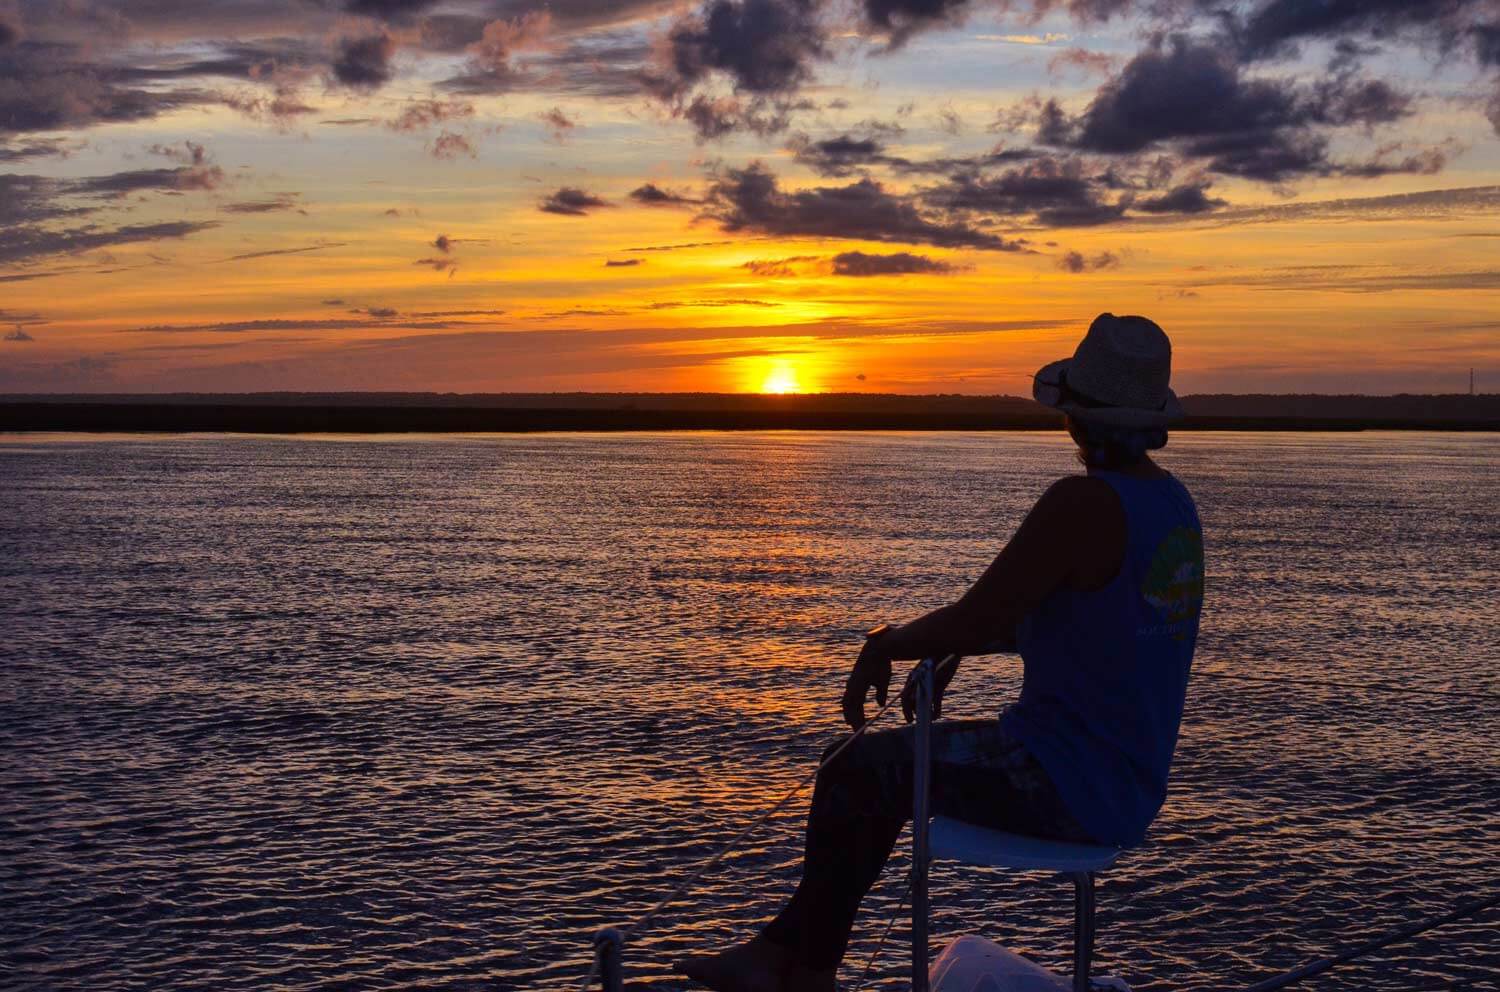 Person sitting on the bow of a boat looking out over the water at a sunset